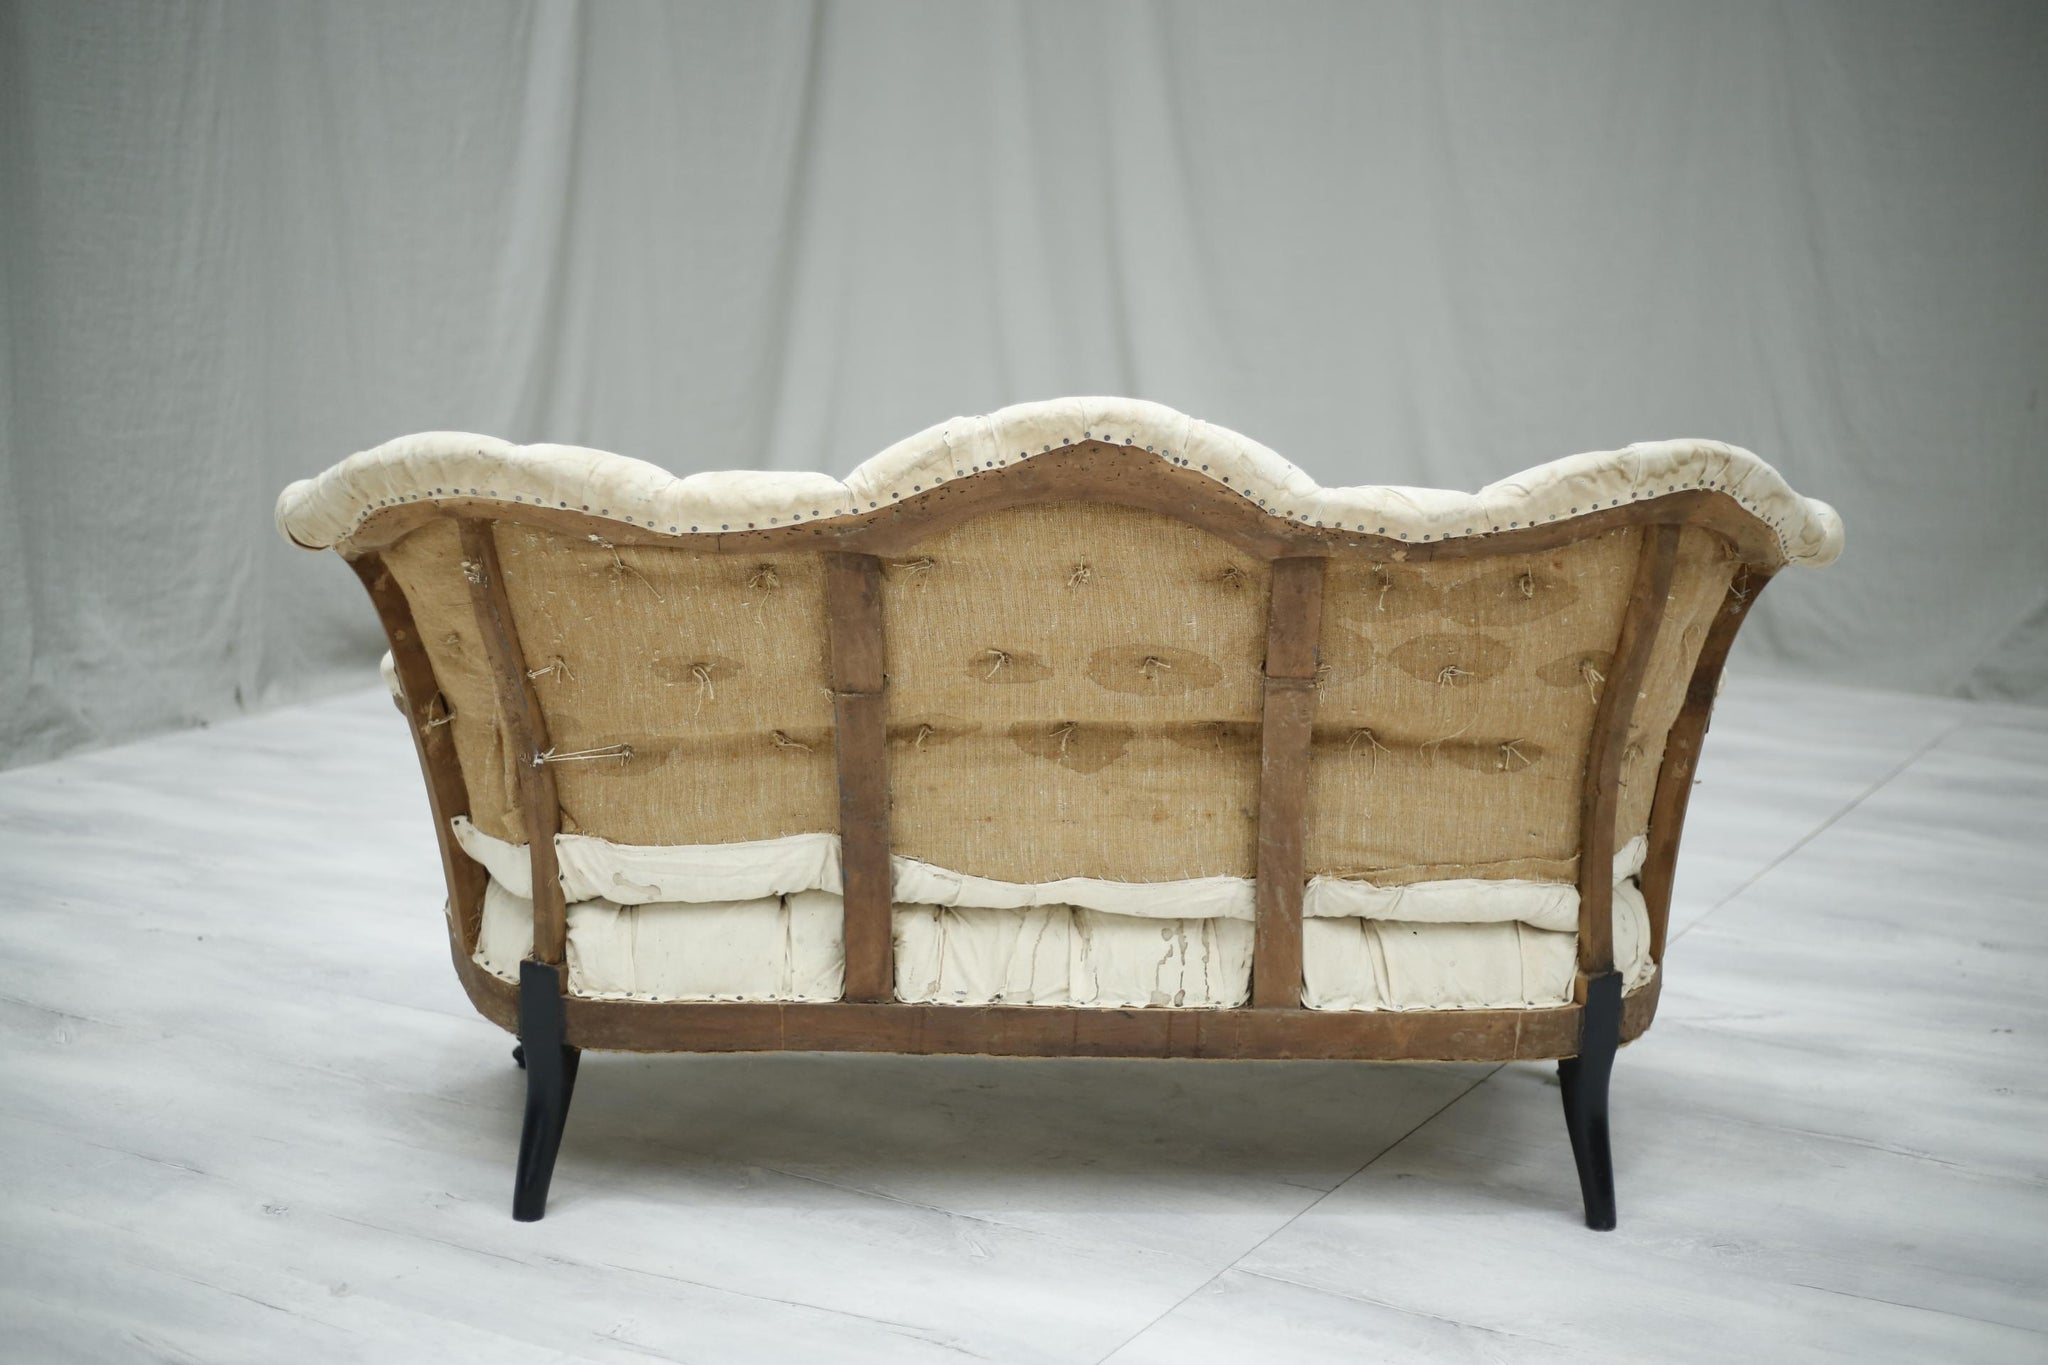 Antique Napoleon III French buttoned sofa - TallBoy Interiors